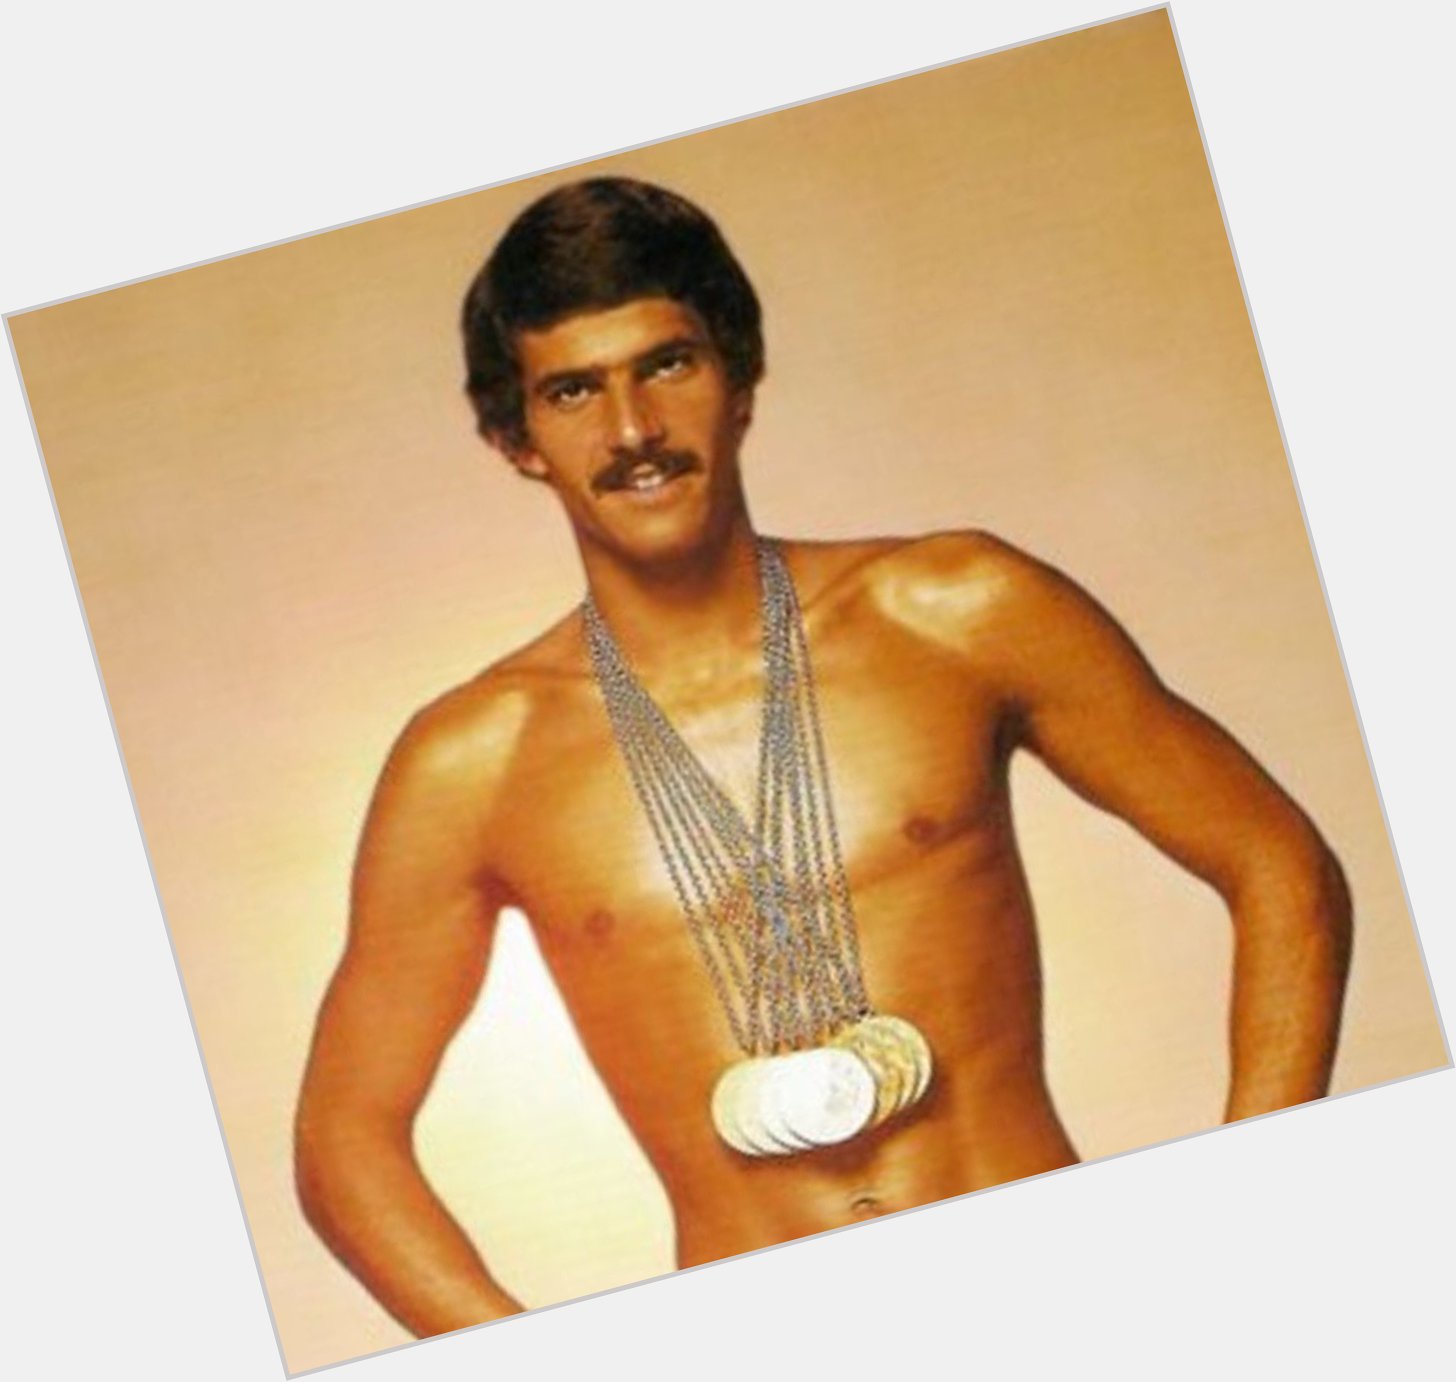 Happy birthday to 9 time Olympic gold medalist and former multiple world record holder Mark Spitz. 